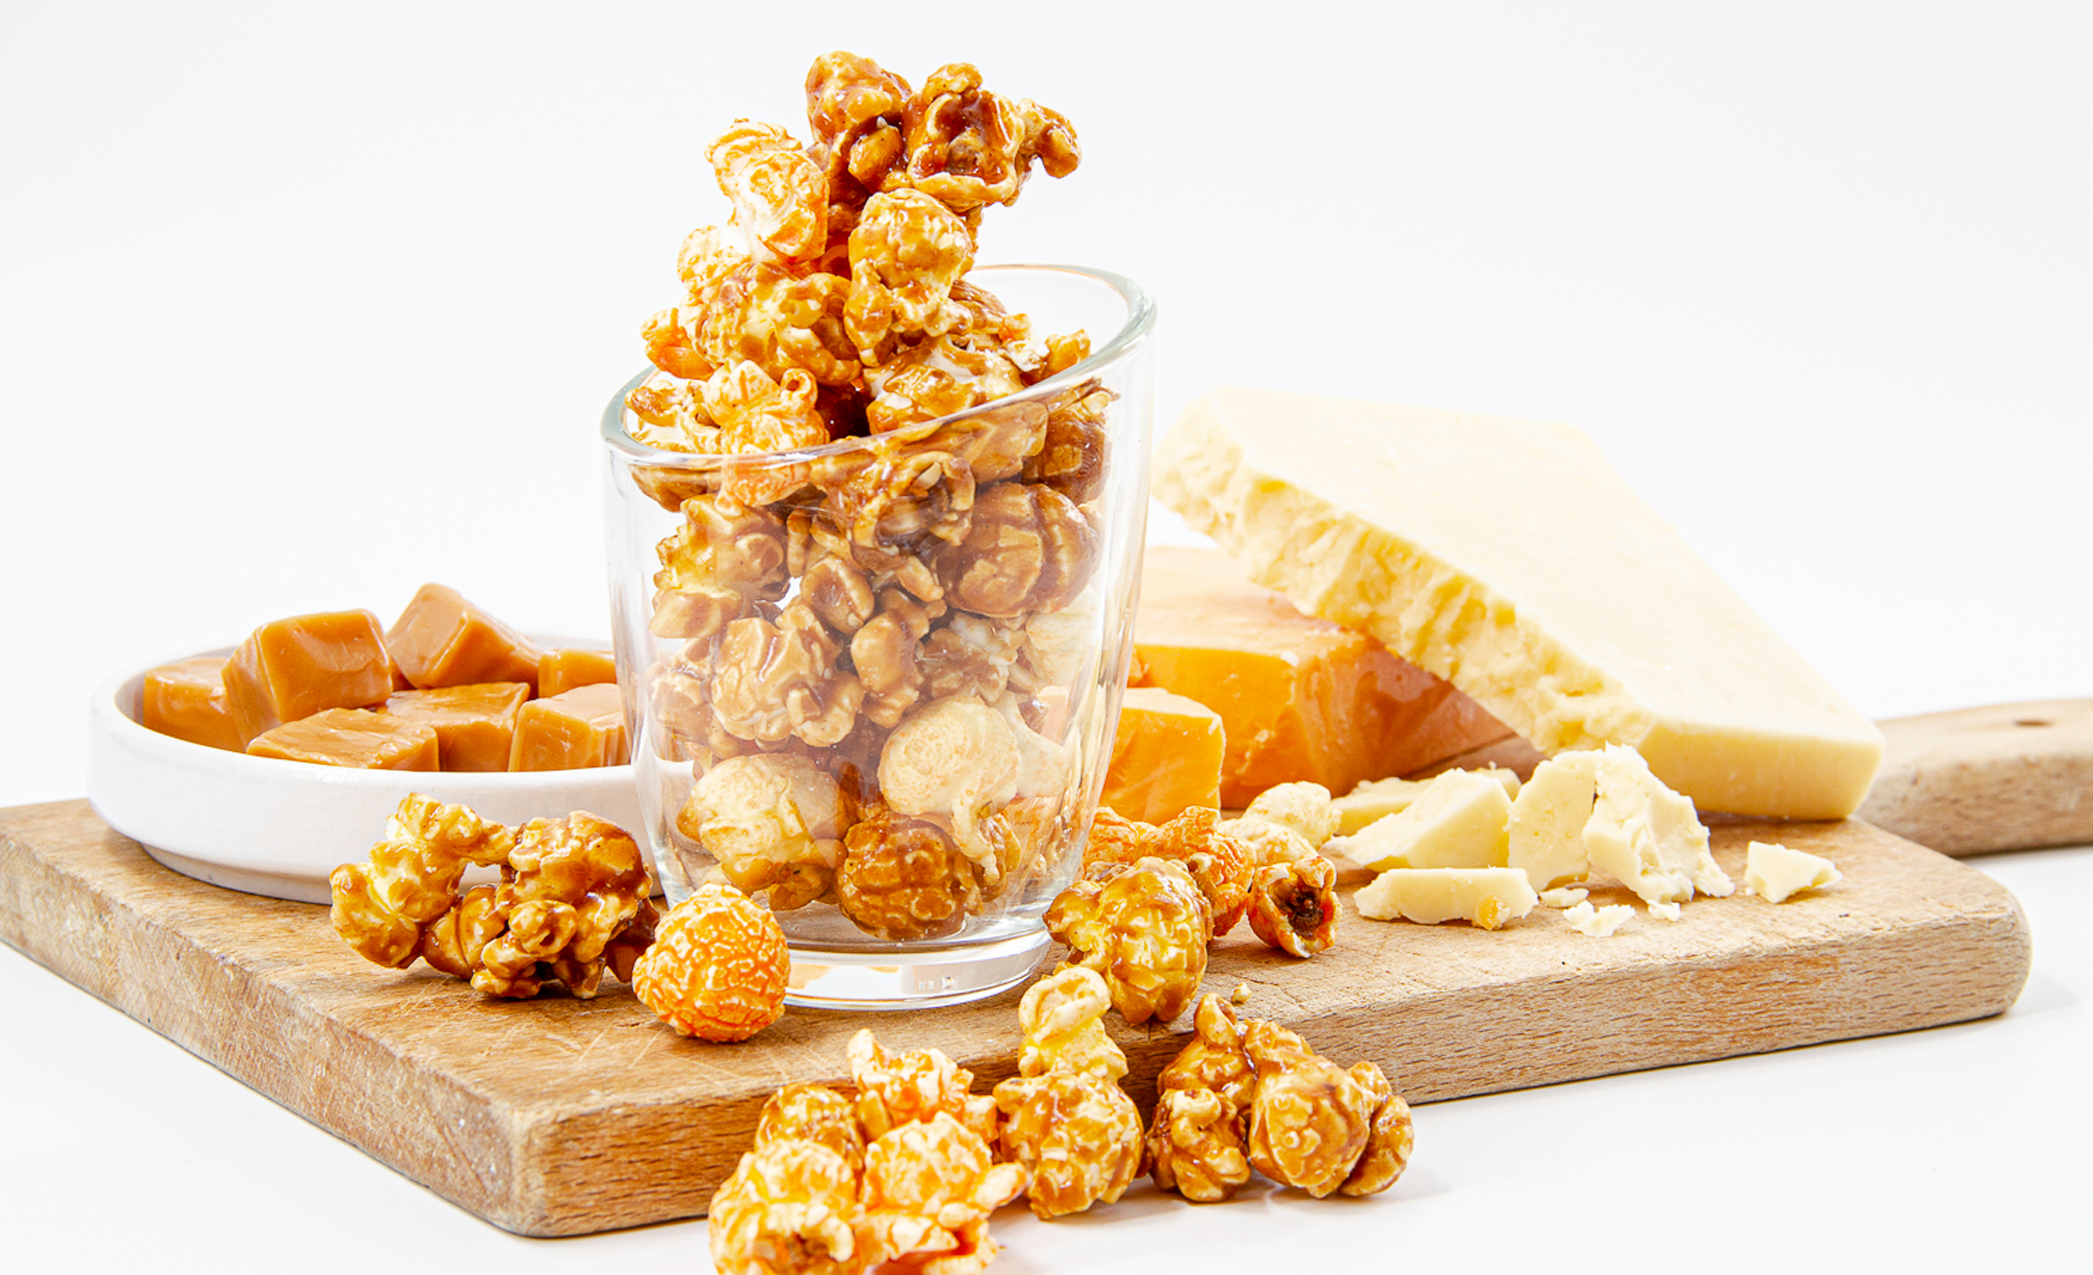 C3 - Cheese, Cheese & Caramel Popcorn displayed on cutting board with caramels and cheese cubes